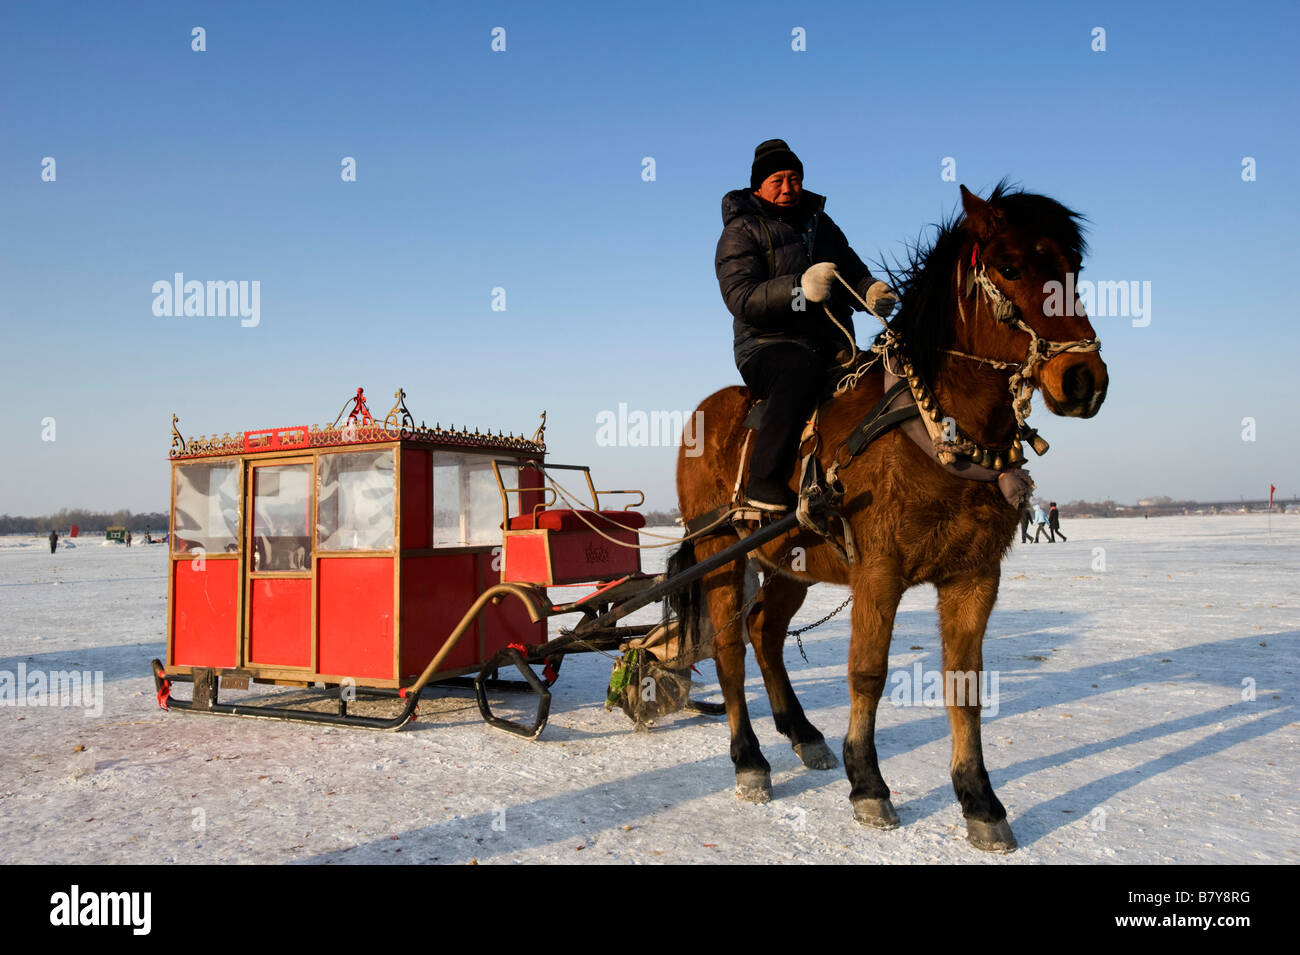 Horse drawn sleigh to carry people and tourists across frozen Songhua River in Harbin northern China during winter 2009 Stock Photo